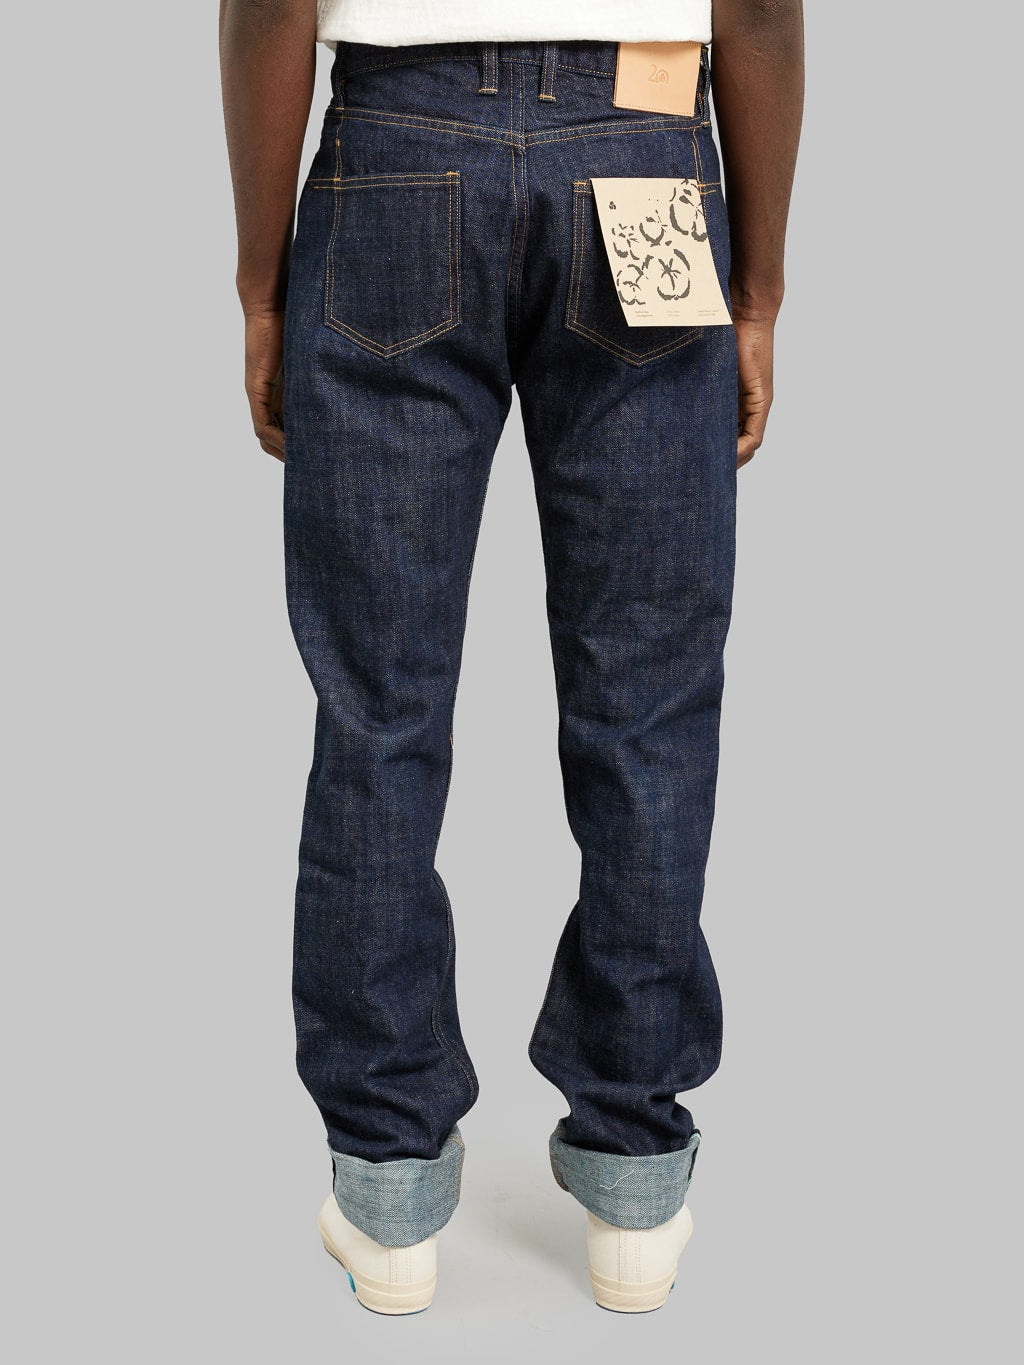 3sixteen CT 20th Anniversary Burkina Faso Classic Tapered Jeans back fit